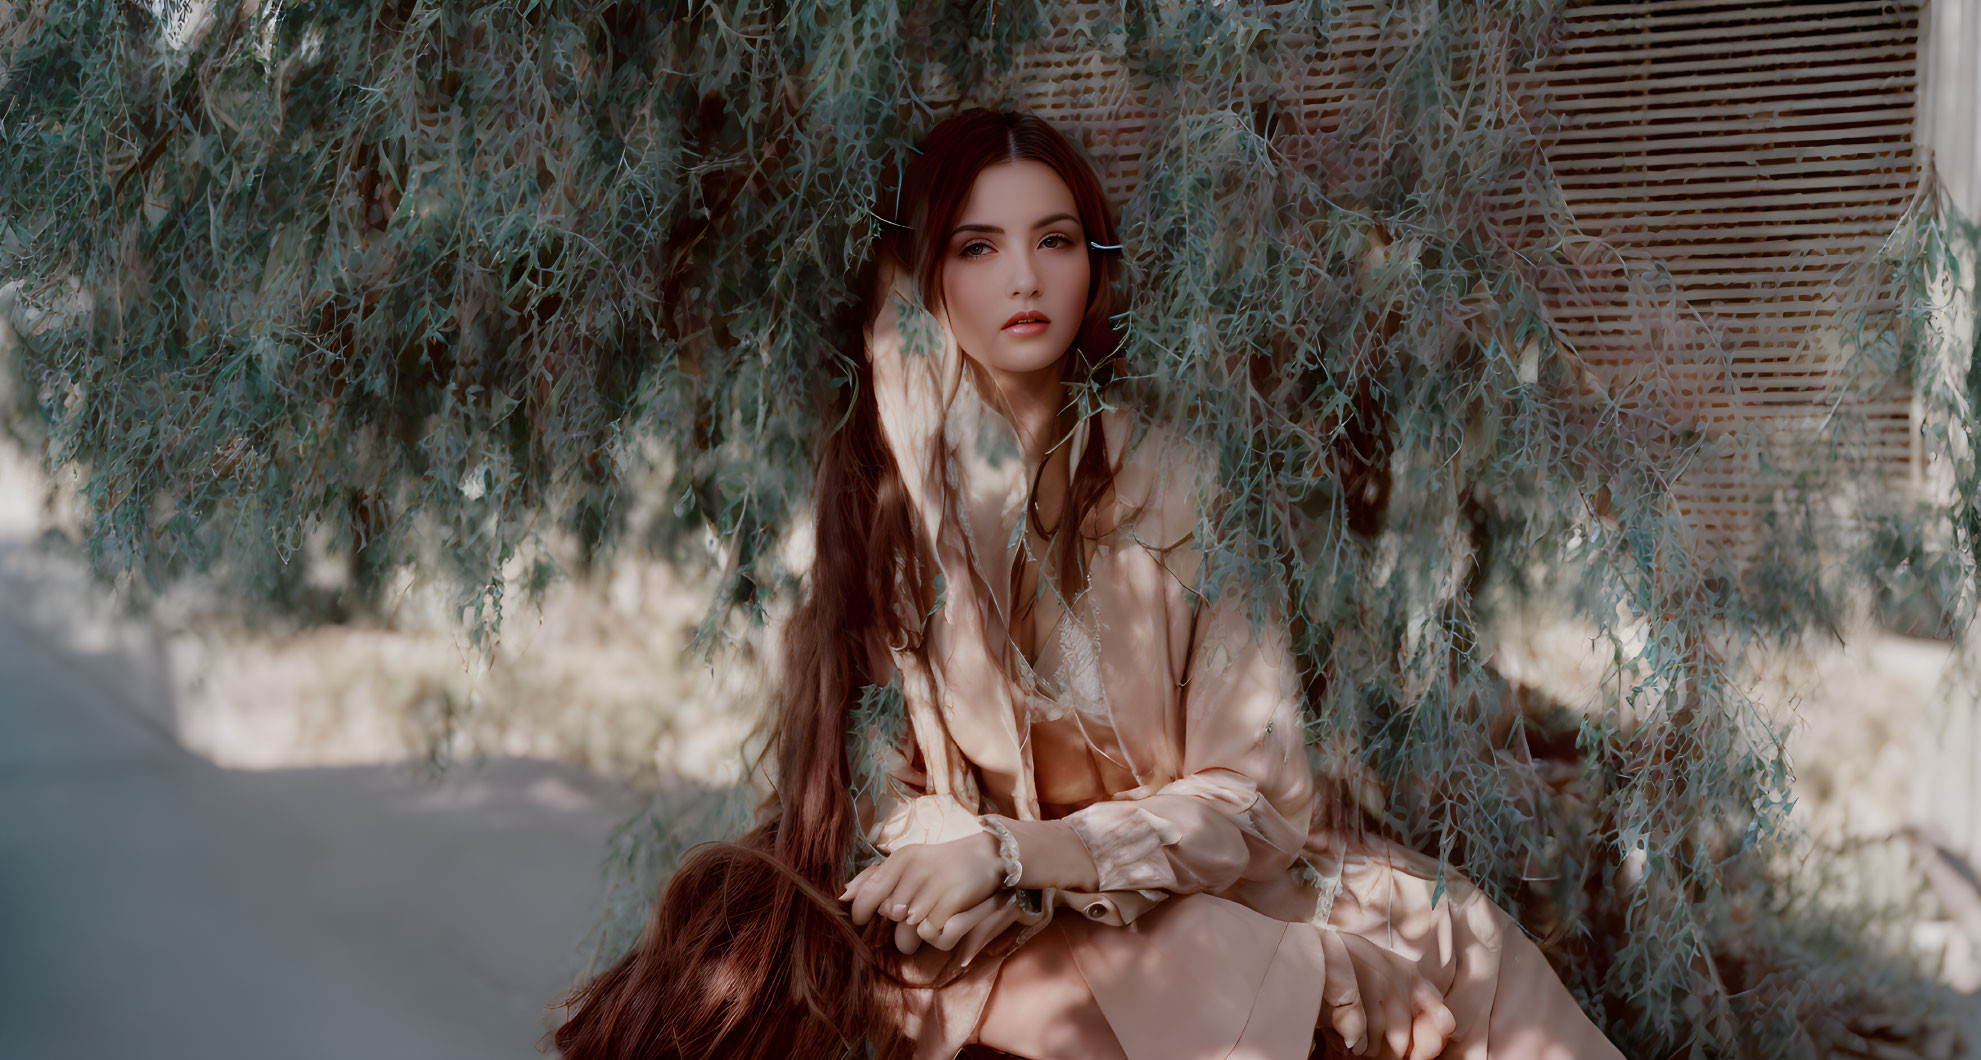 Long-haired woman in beige outfit sitting under tree with wispy foliage